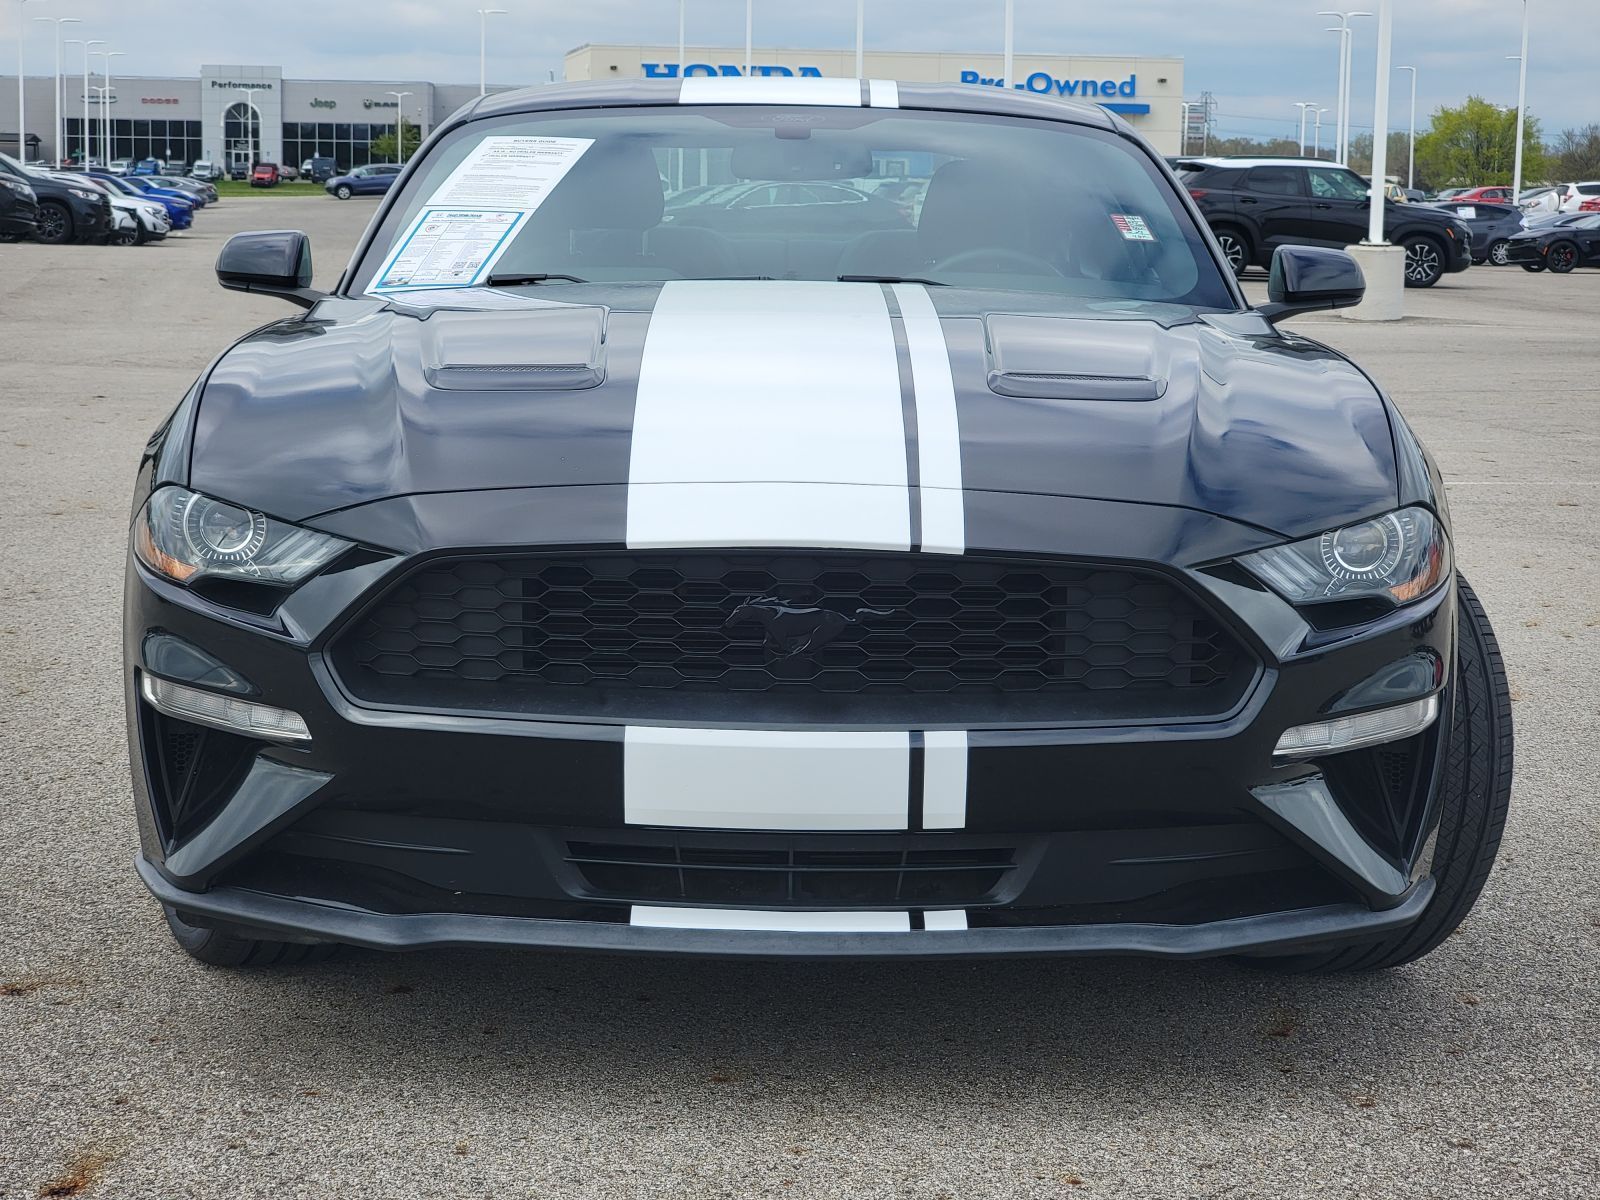 Used, 2019 Ford Mustang EcoBoost, Black, P0537-10